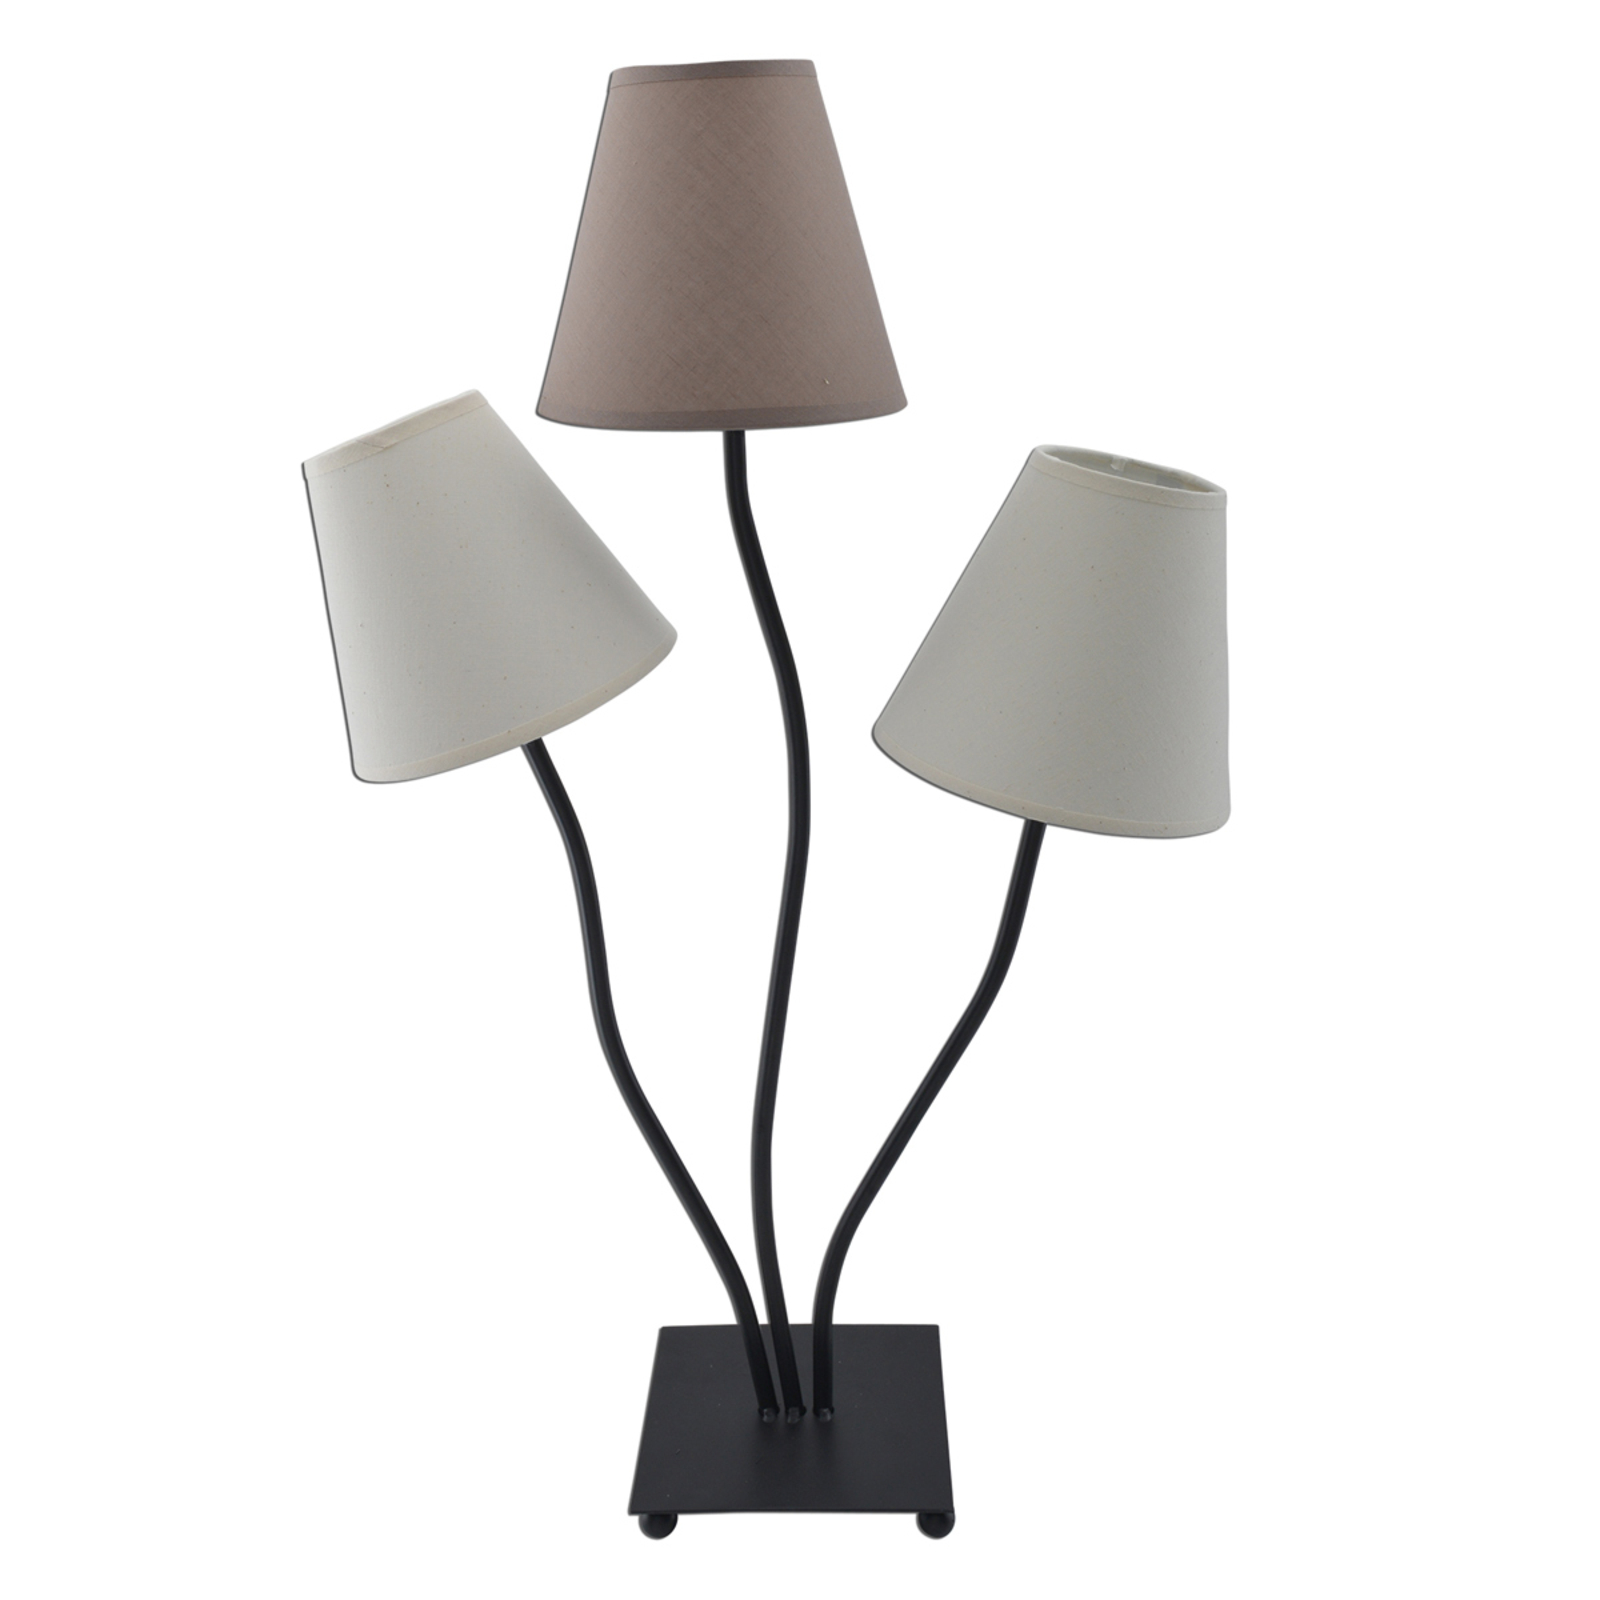 Twiddle - 3-bulb table lamp in brown tones